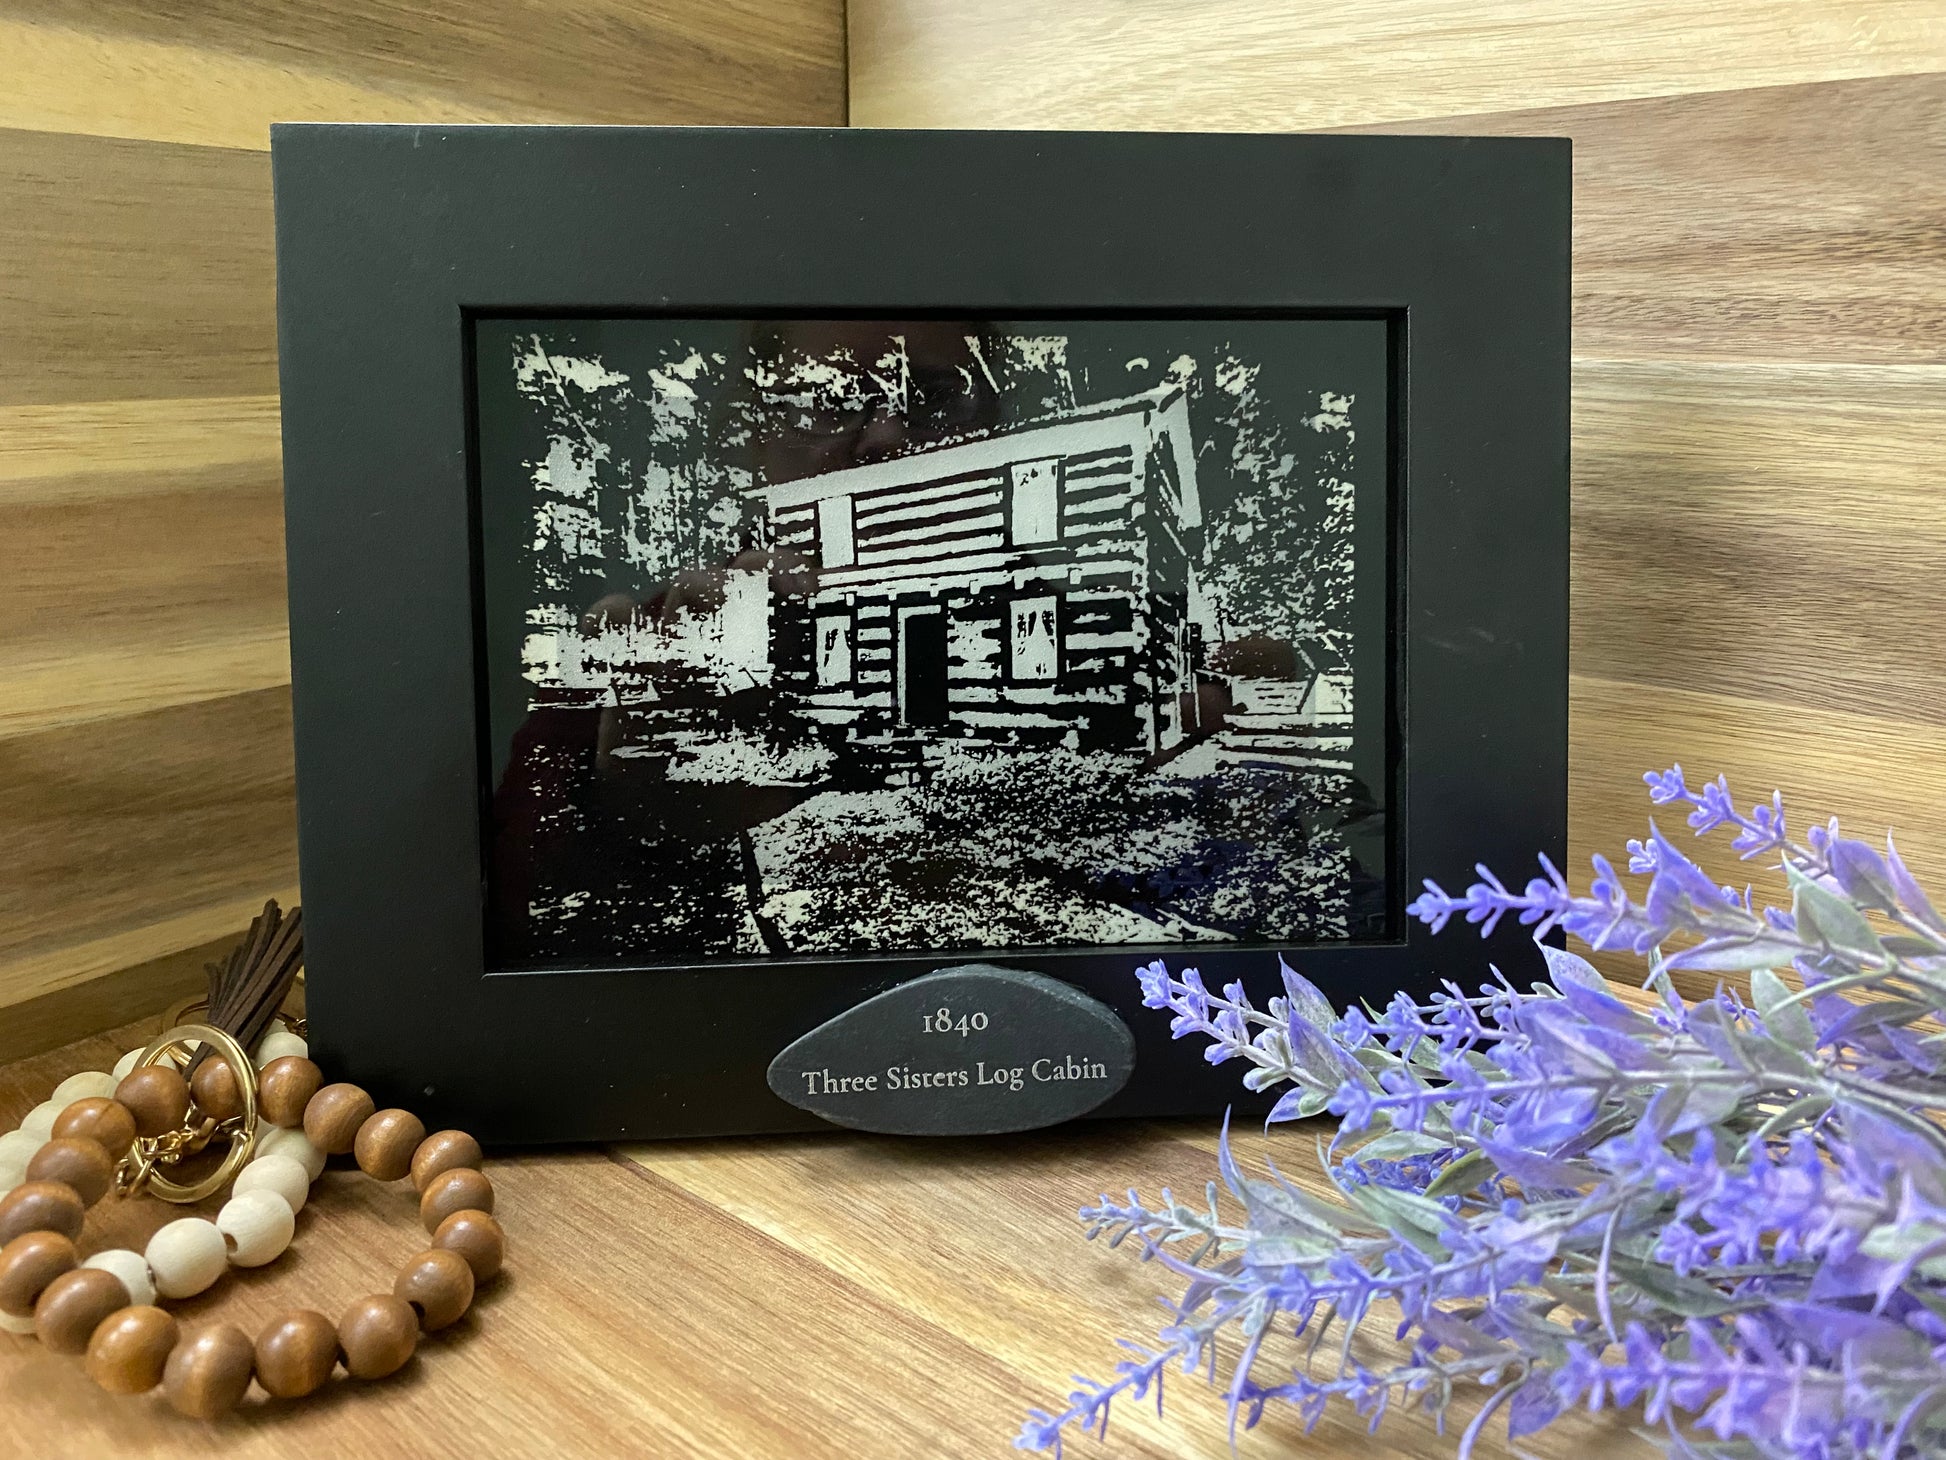 Custom Old School Framed "Negative-style" Engraved Photo of Your Home